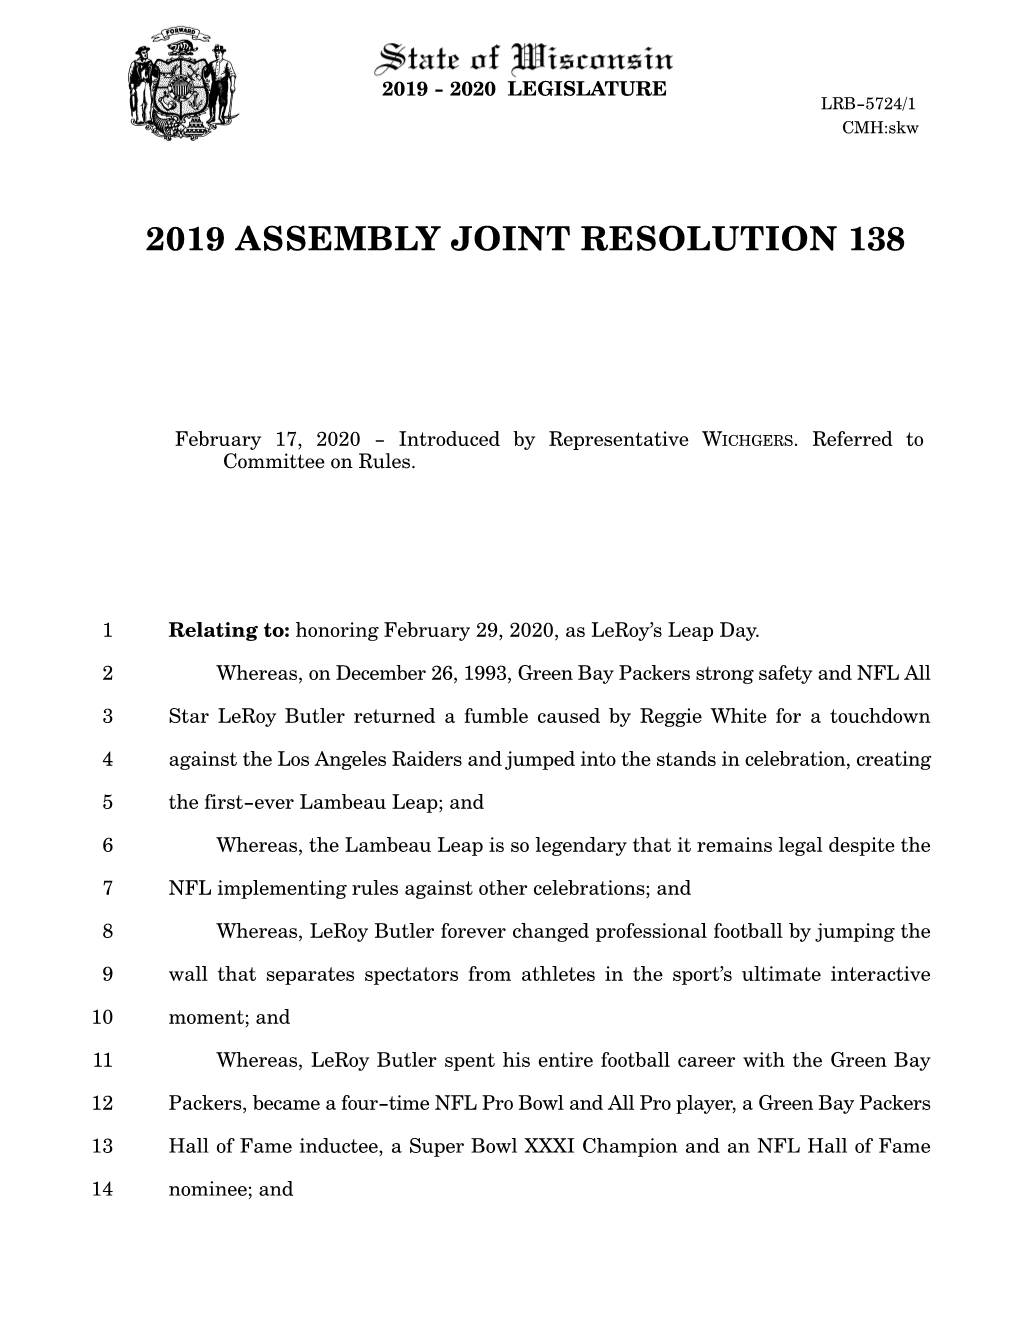 2019 Assembly Joint Resolution 138